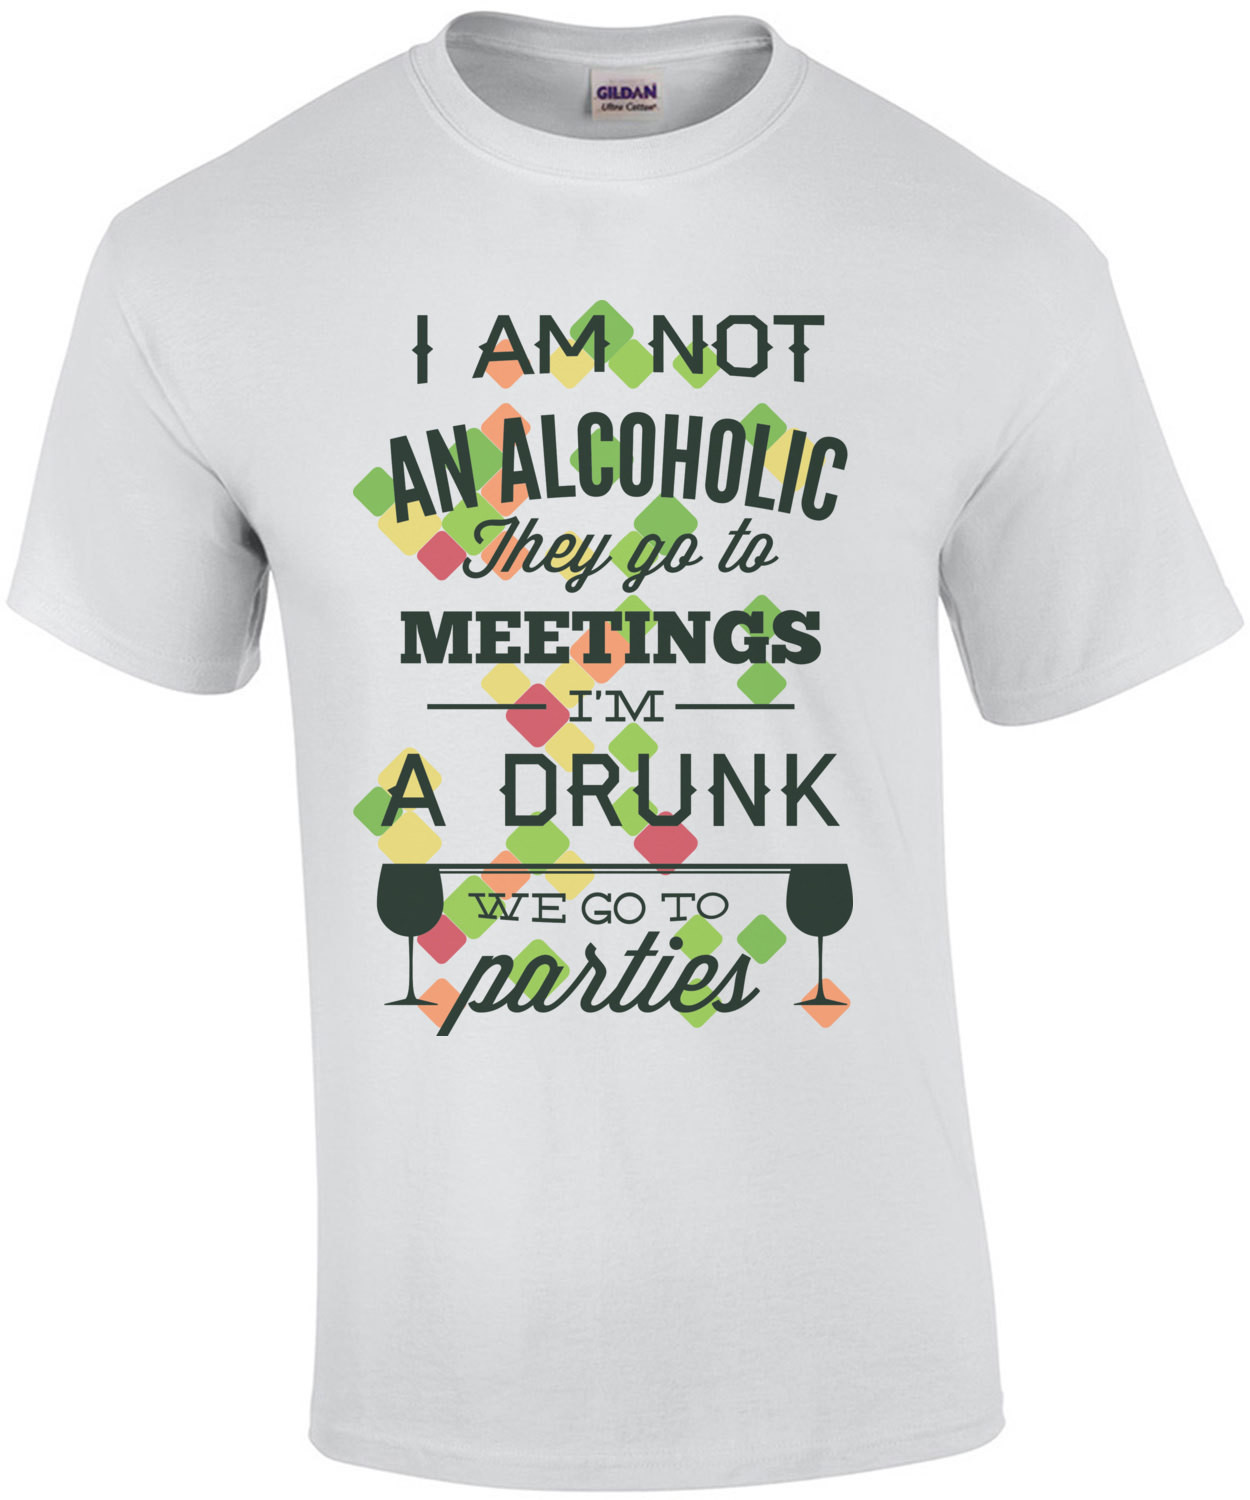 I'm Not An Alcoholic They Go To Meetings I'm A Drunk We Go To Parties T-Shirt